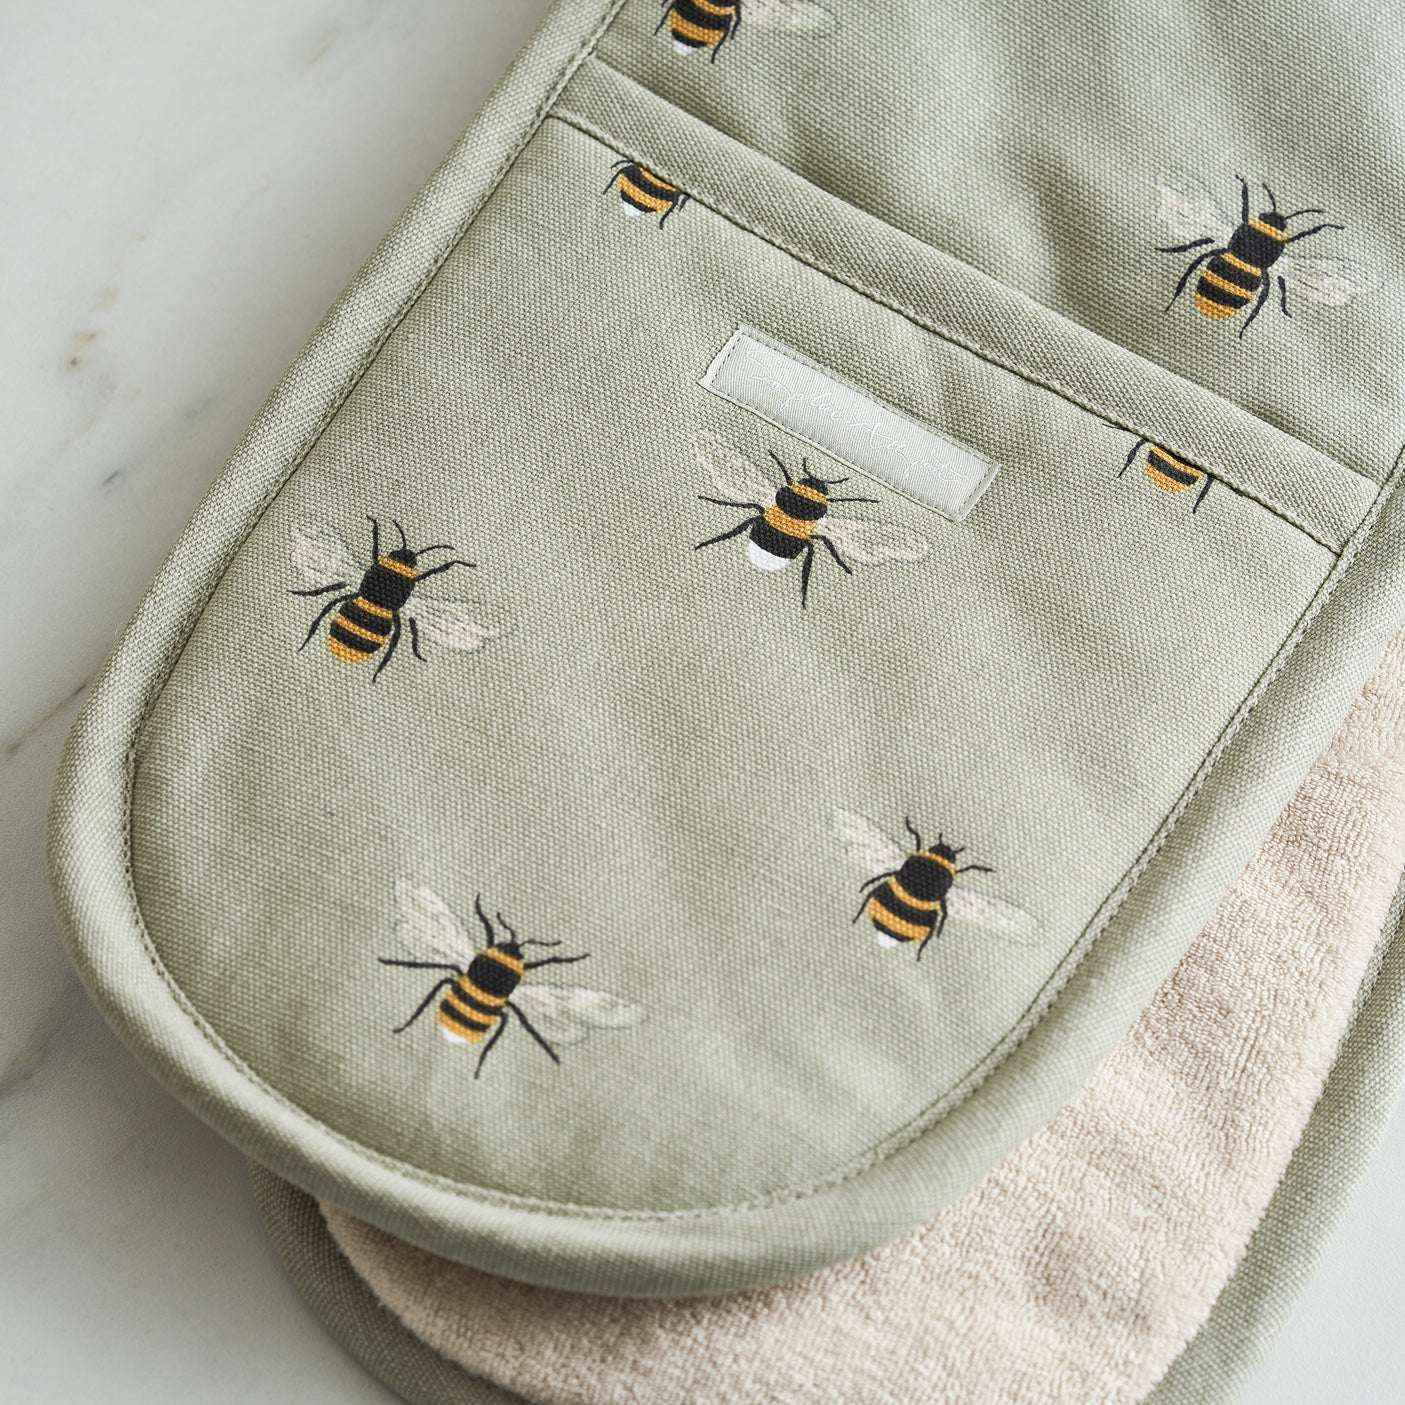 Bees Double Oven Glove